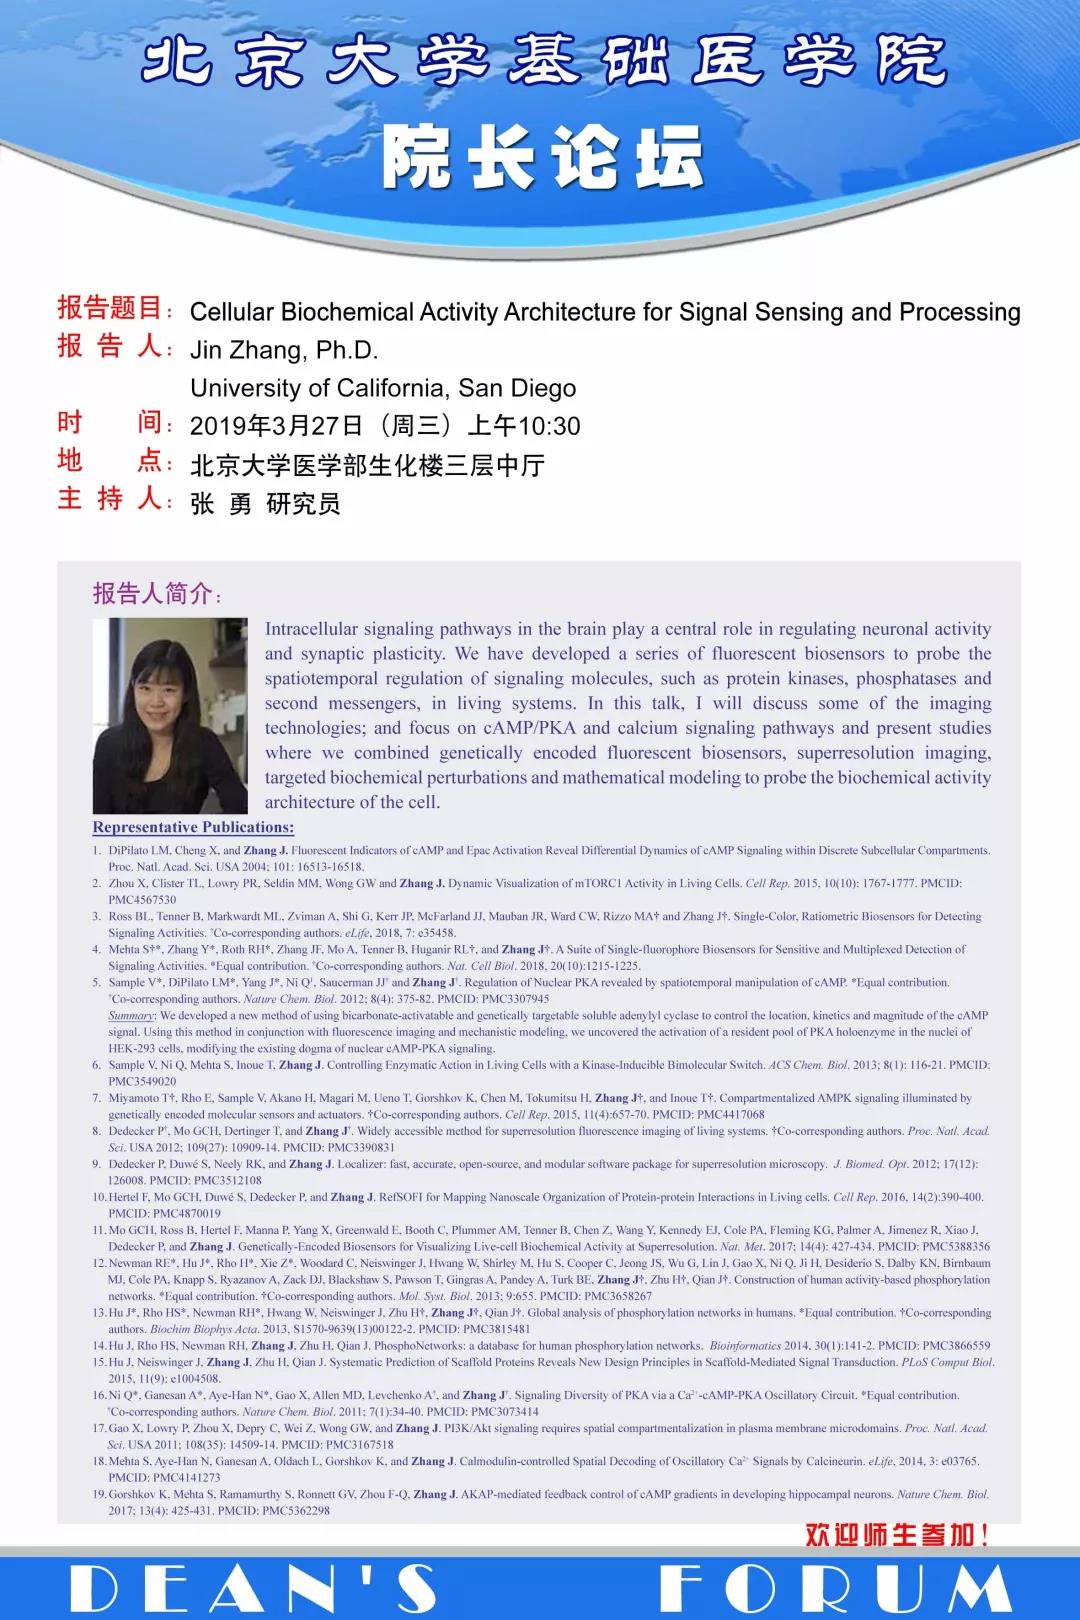 19 03 27 Seminar Cellular Biochemical Activity Architecture For Signal Sensing And Processing Idg Mcgovern Institute For Brain Research At Pku